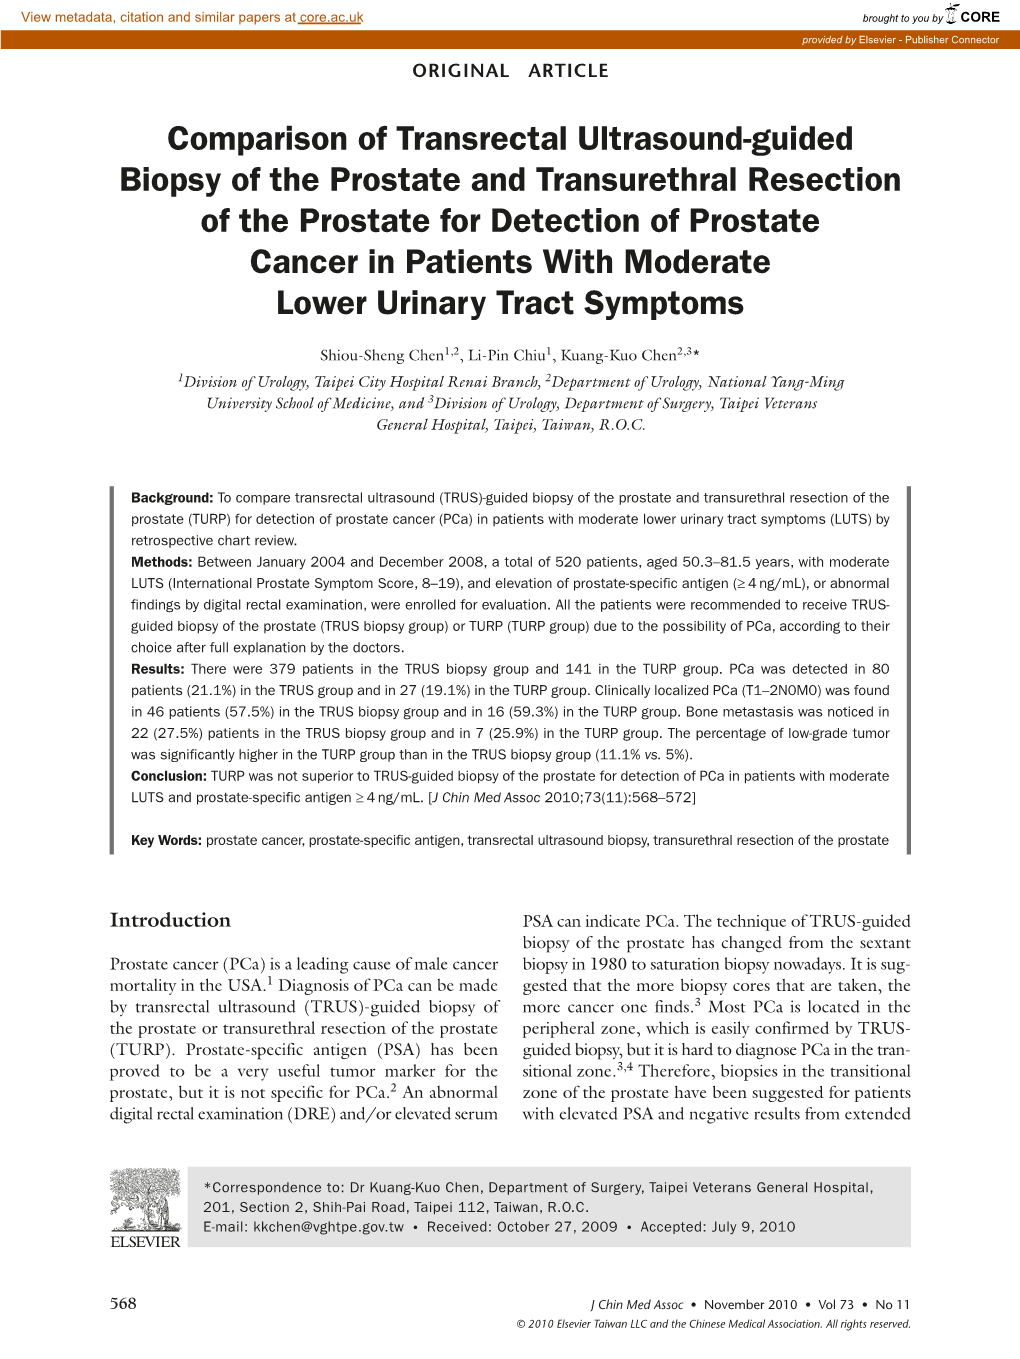 Comparison of Transrectal Ultrasound-Guided Biopsy of the Prostate And